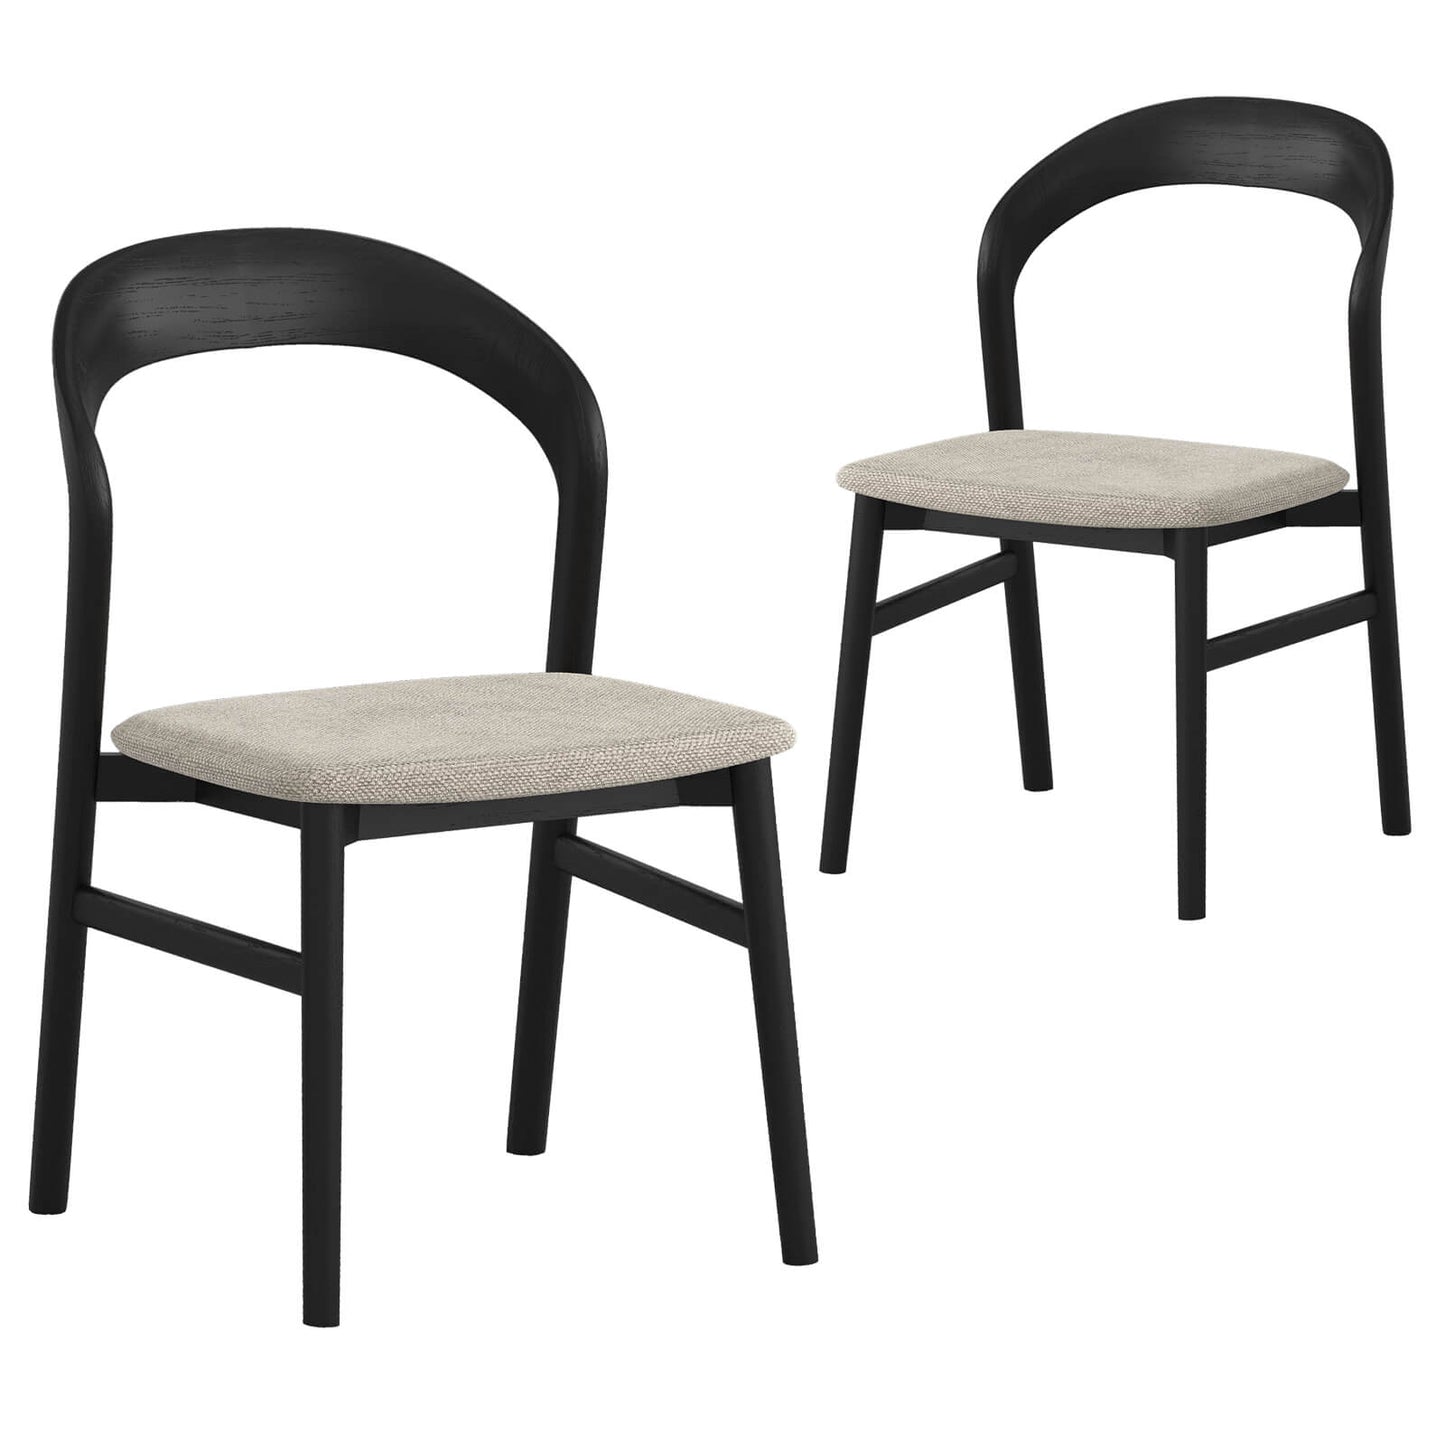 Alpine | Natural Black Scandinavian Style Upholstered Wooden Dining Chairs | Set Of 2 | Black Grey